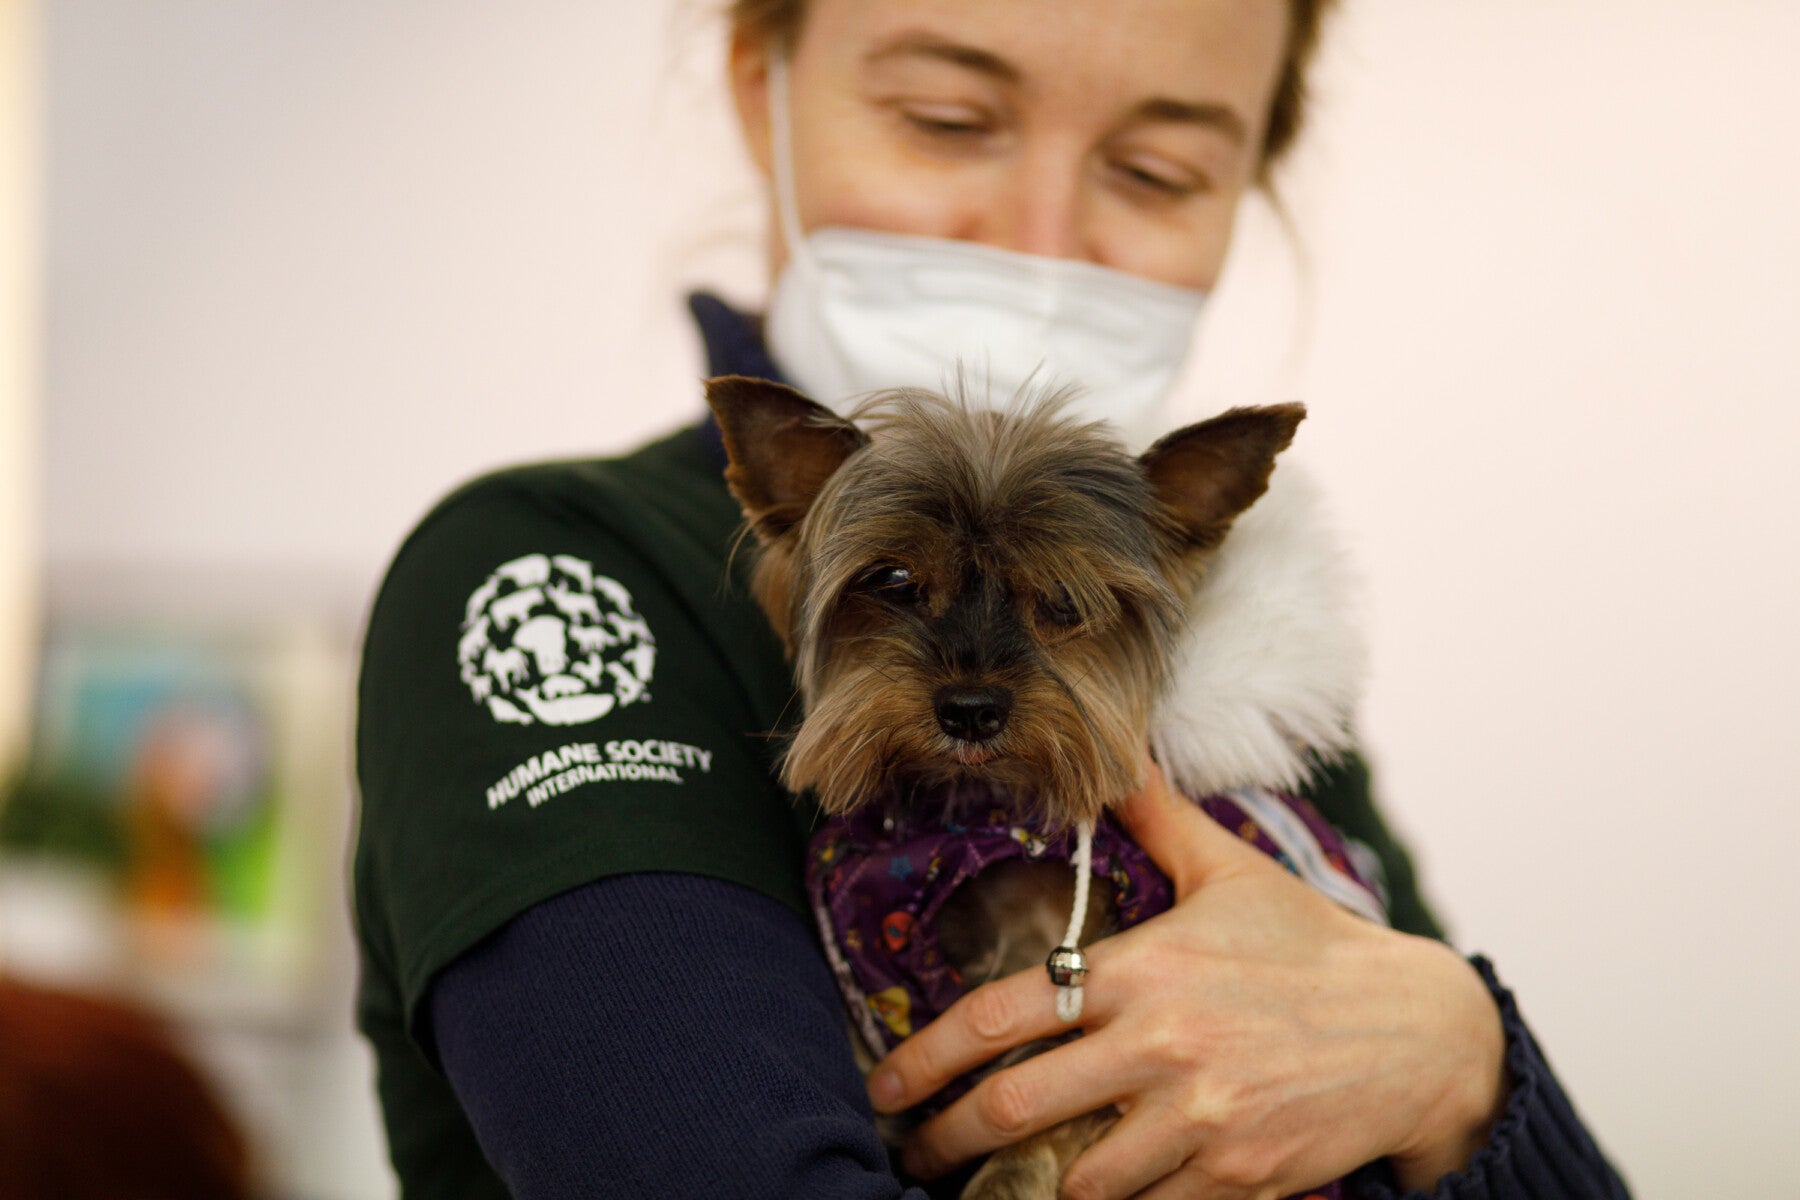 Pets and people fleeing Ukraine provided comfort amid the crisis by animal  charity Humane Society International - Humane Society International